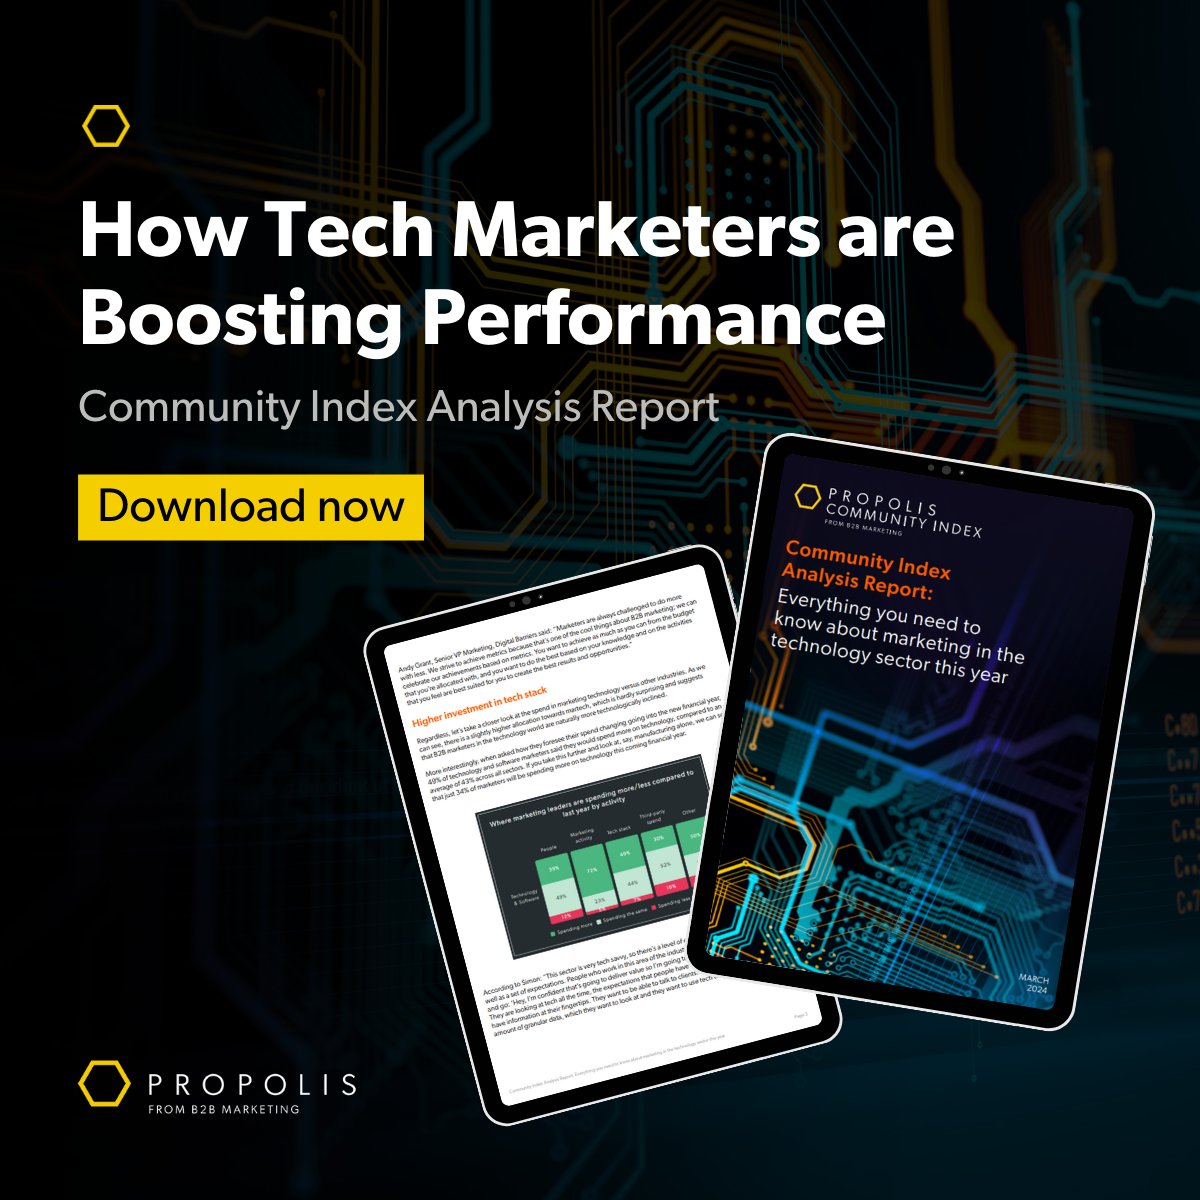 In the latest Community Index analysis report, we present you with real-time data on budgets, resourcing, and teams, providing a deeper understanding of how tech and software marketing are paving the way. Download a free copy of the report here: okt.to/a92wci